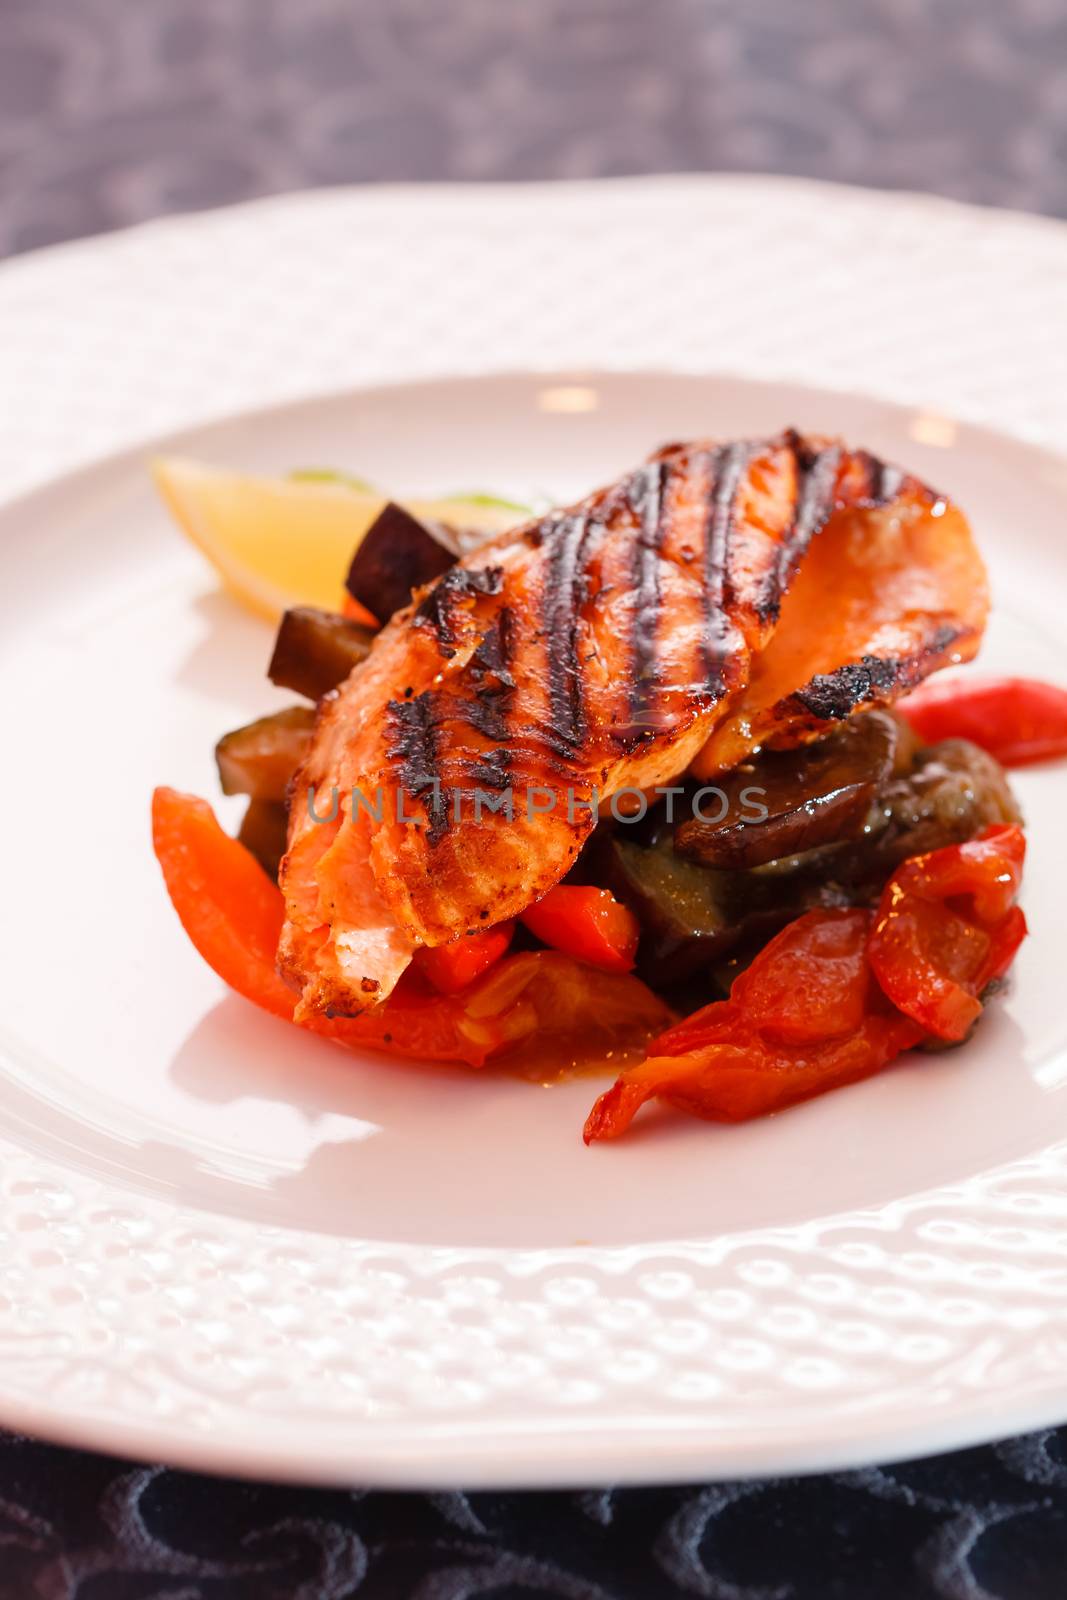 salmon steak with vegetables by shebeko